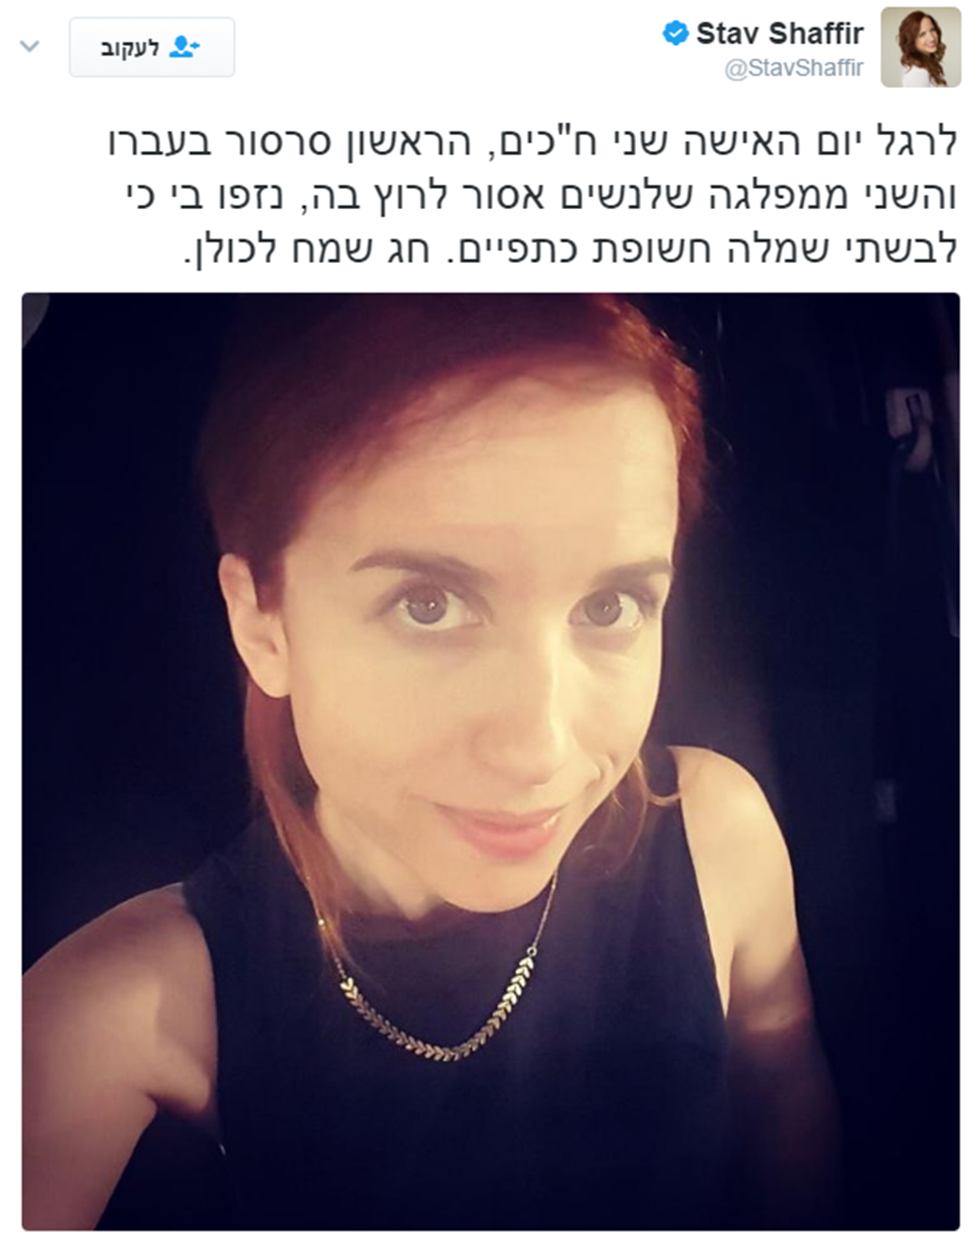 Picture MK Stav Shaffir posted to Twitter displaying the offending dress in question